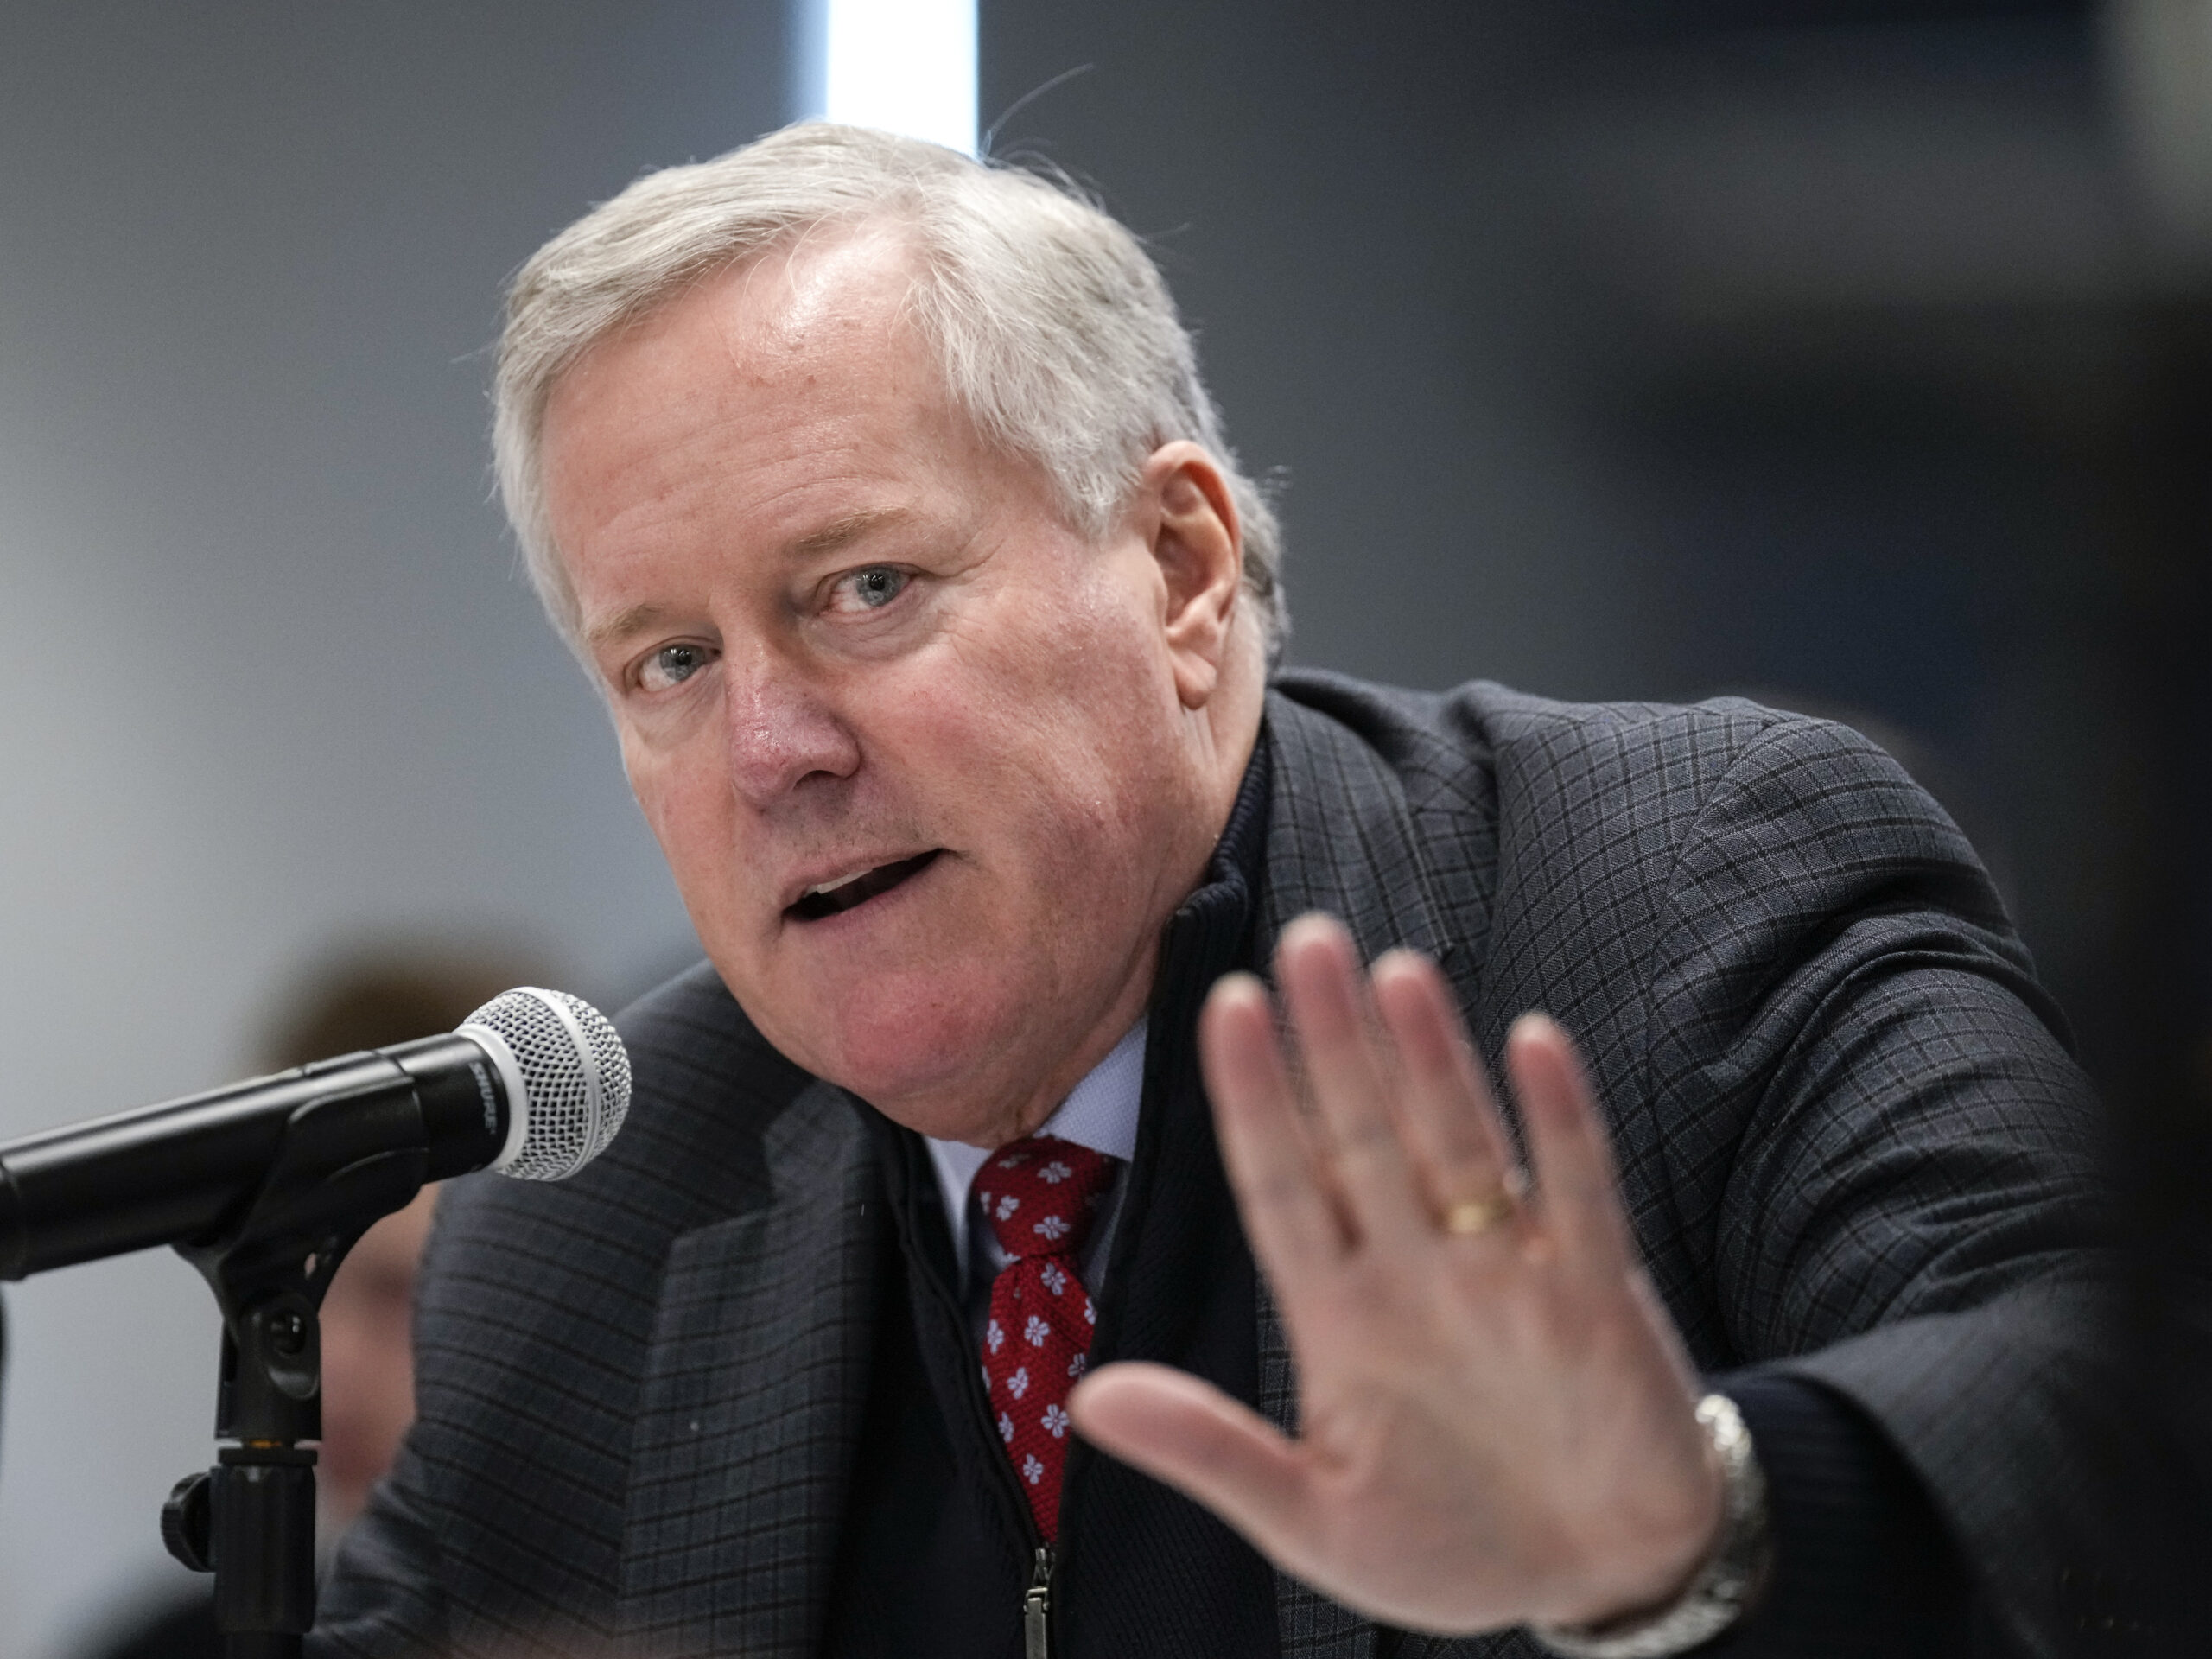 Former Trump White House Chief of Staff Mark Meadows speaks during a forum on Nov. 14, 2022. Meadows has been indicted in Arizona for his alleged efforts to keep former President Donald Trump in power.